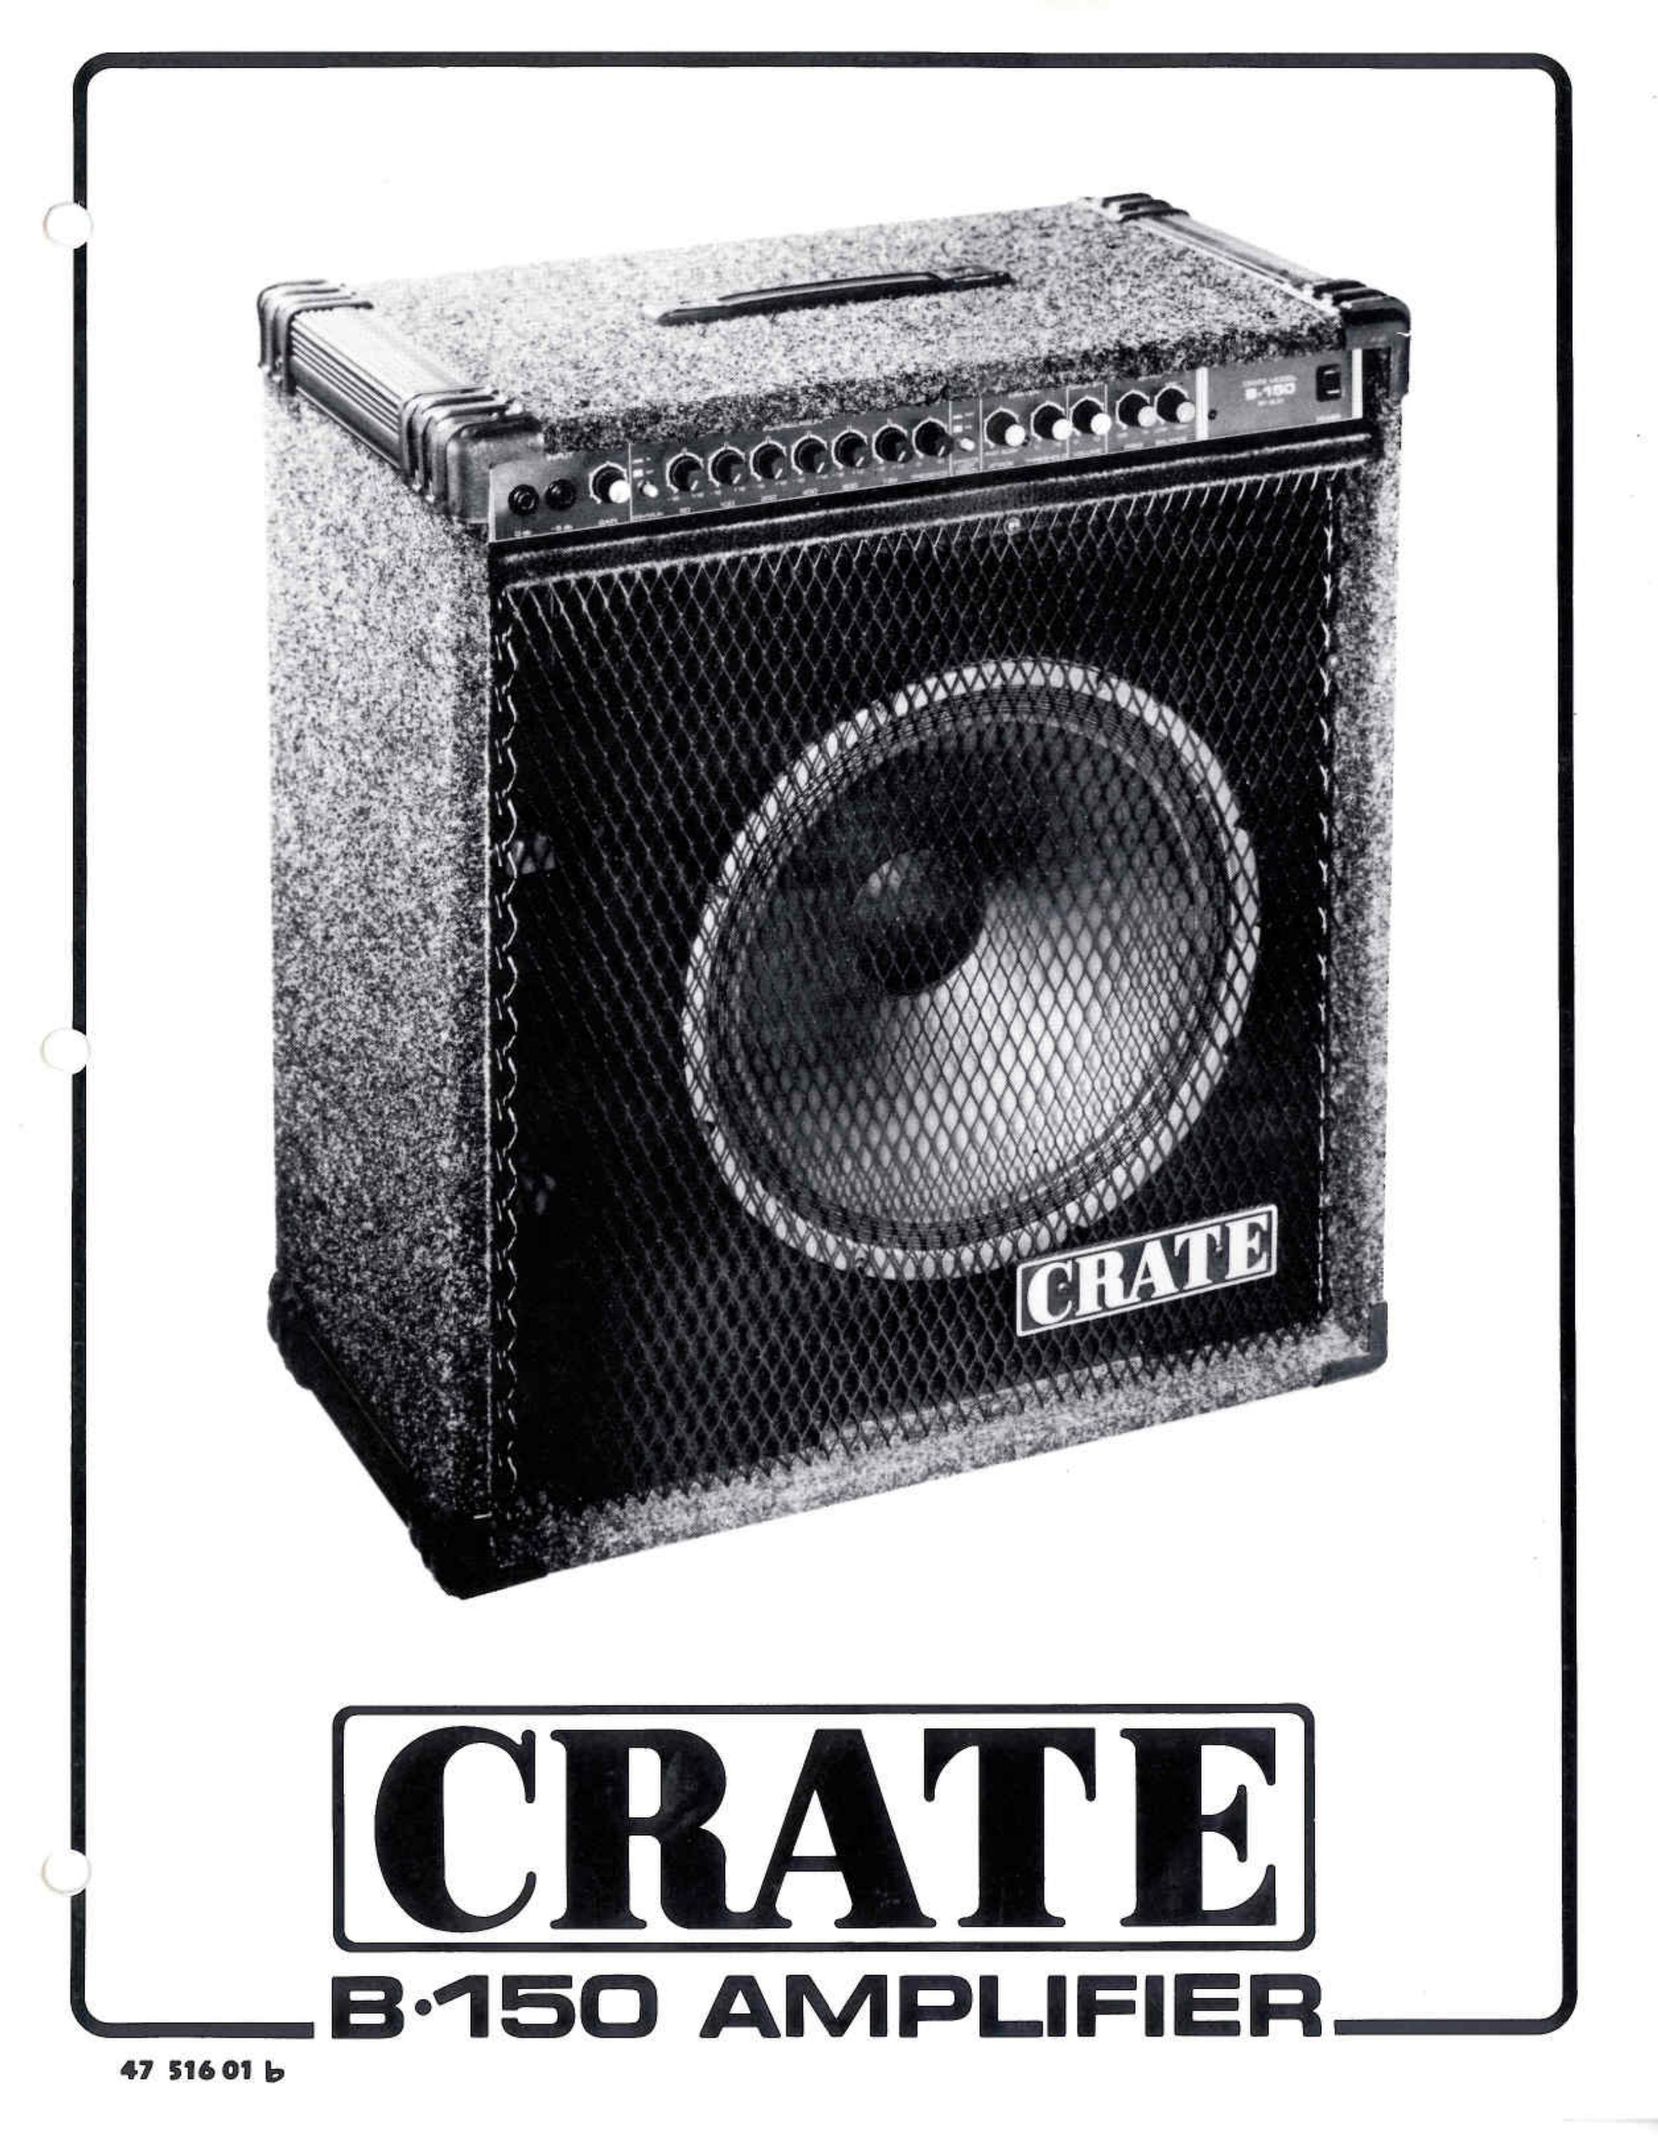 Crate Amplifiers B-150 Stereo Amplifier User Manual